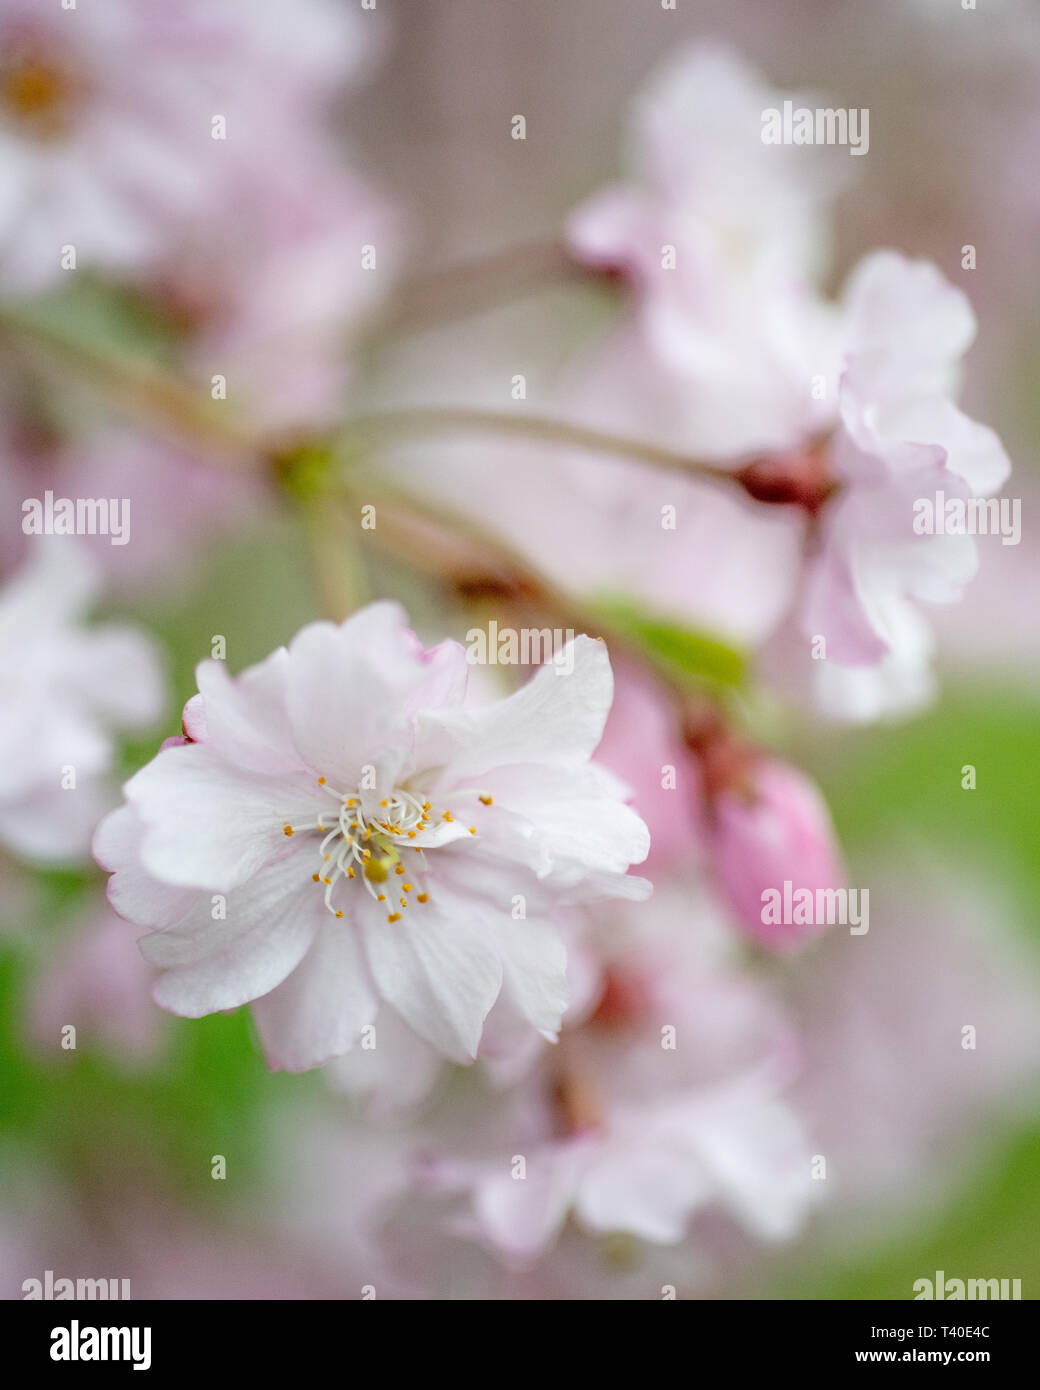 Cherry tree blossoms in spring - prunus rosaceae blossom close up -flowering trees blooming with pink and white flowers - cherry tree blossom close up Stock Photo